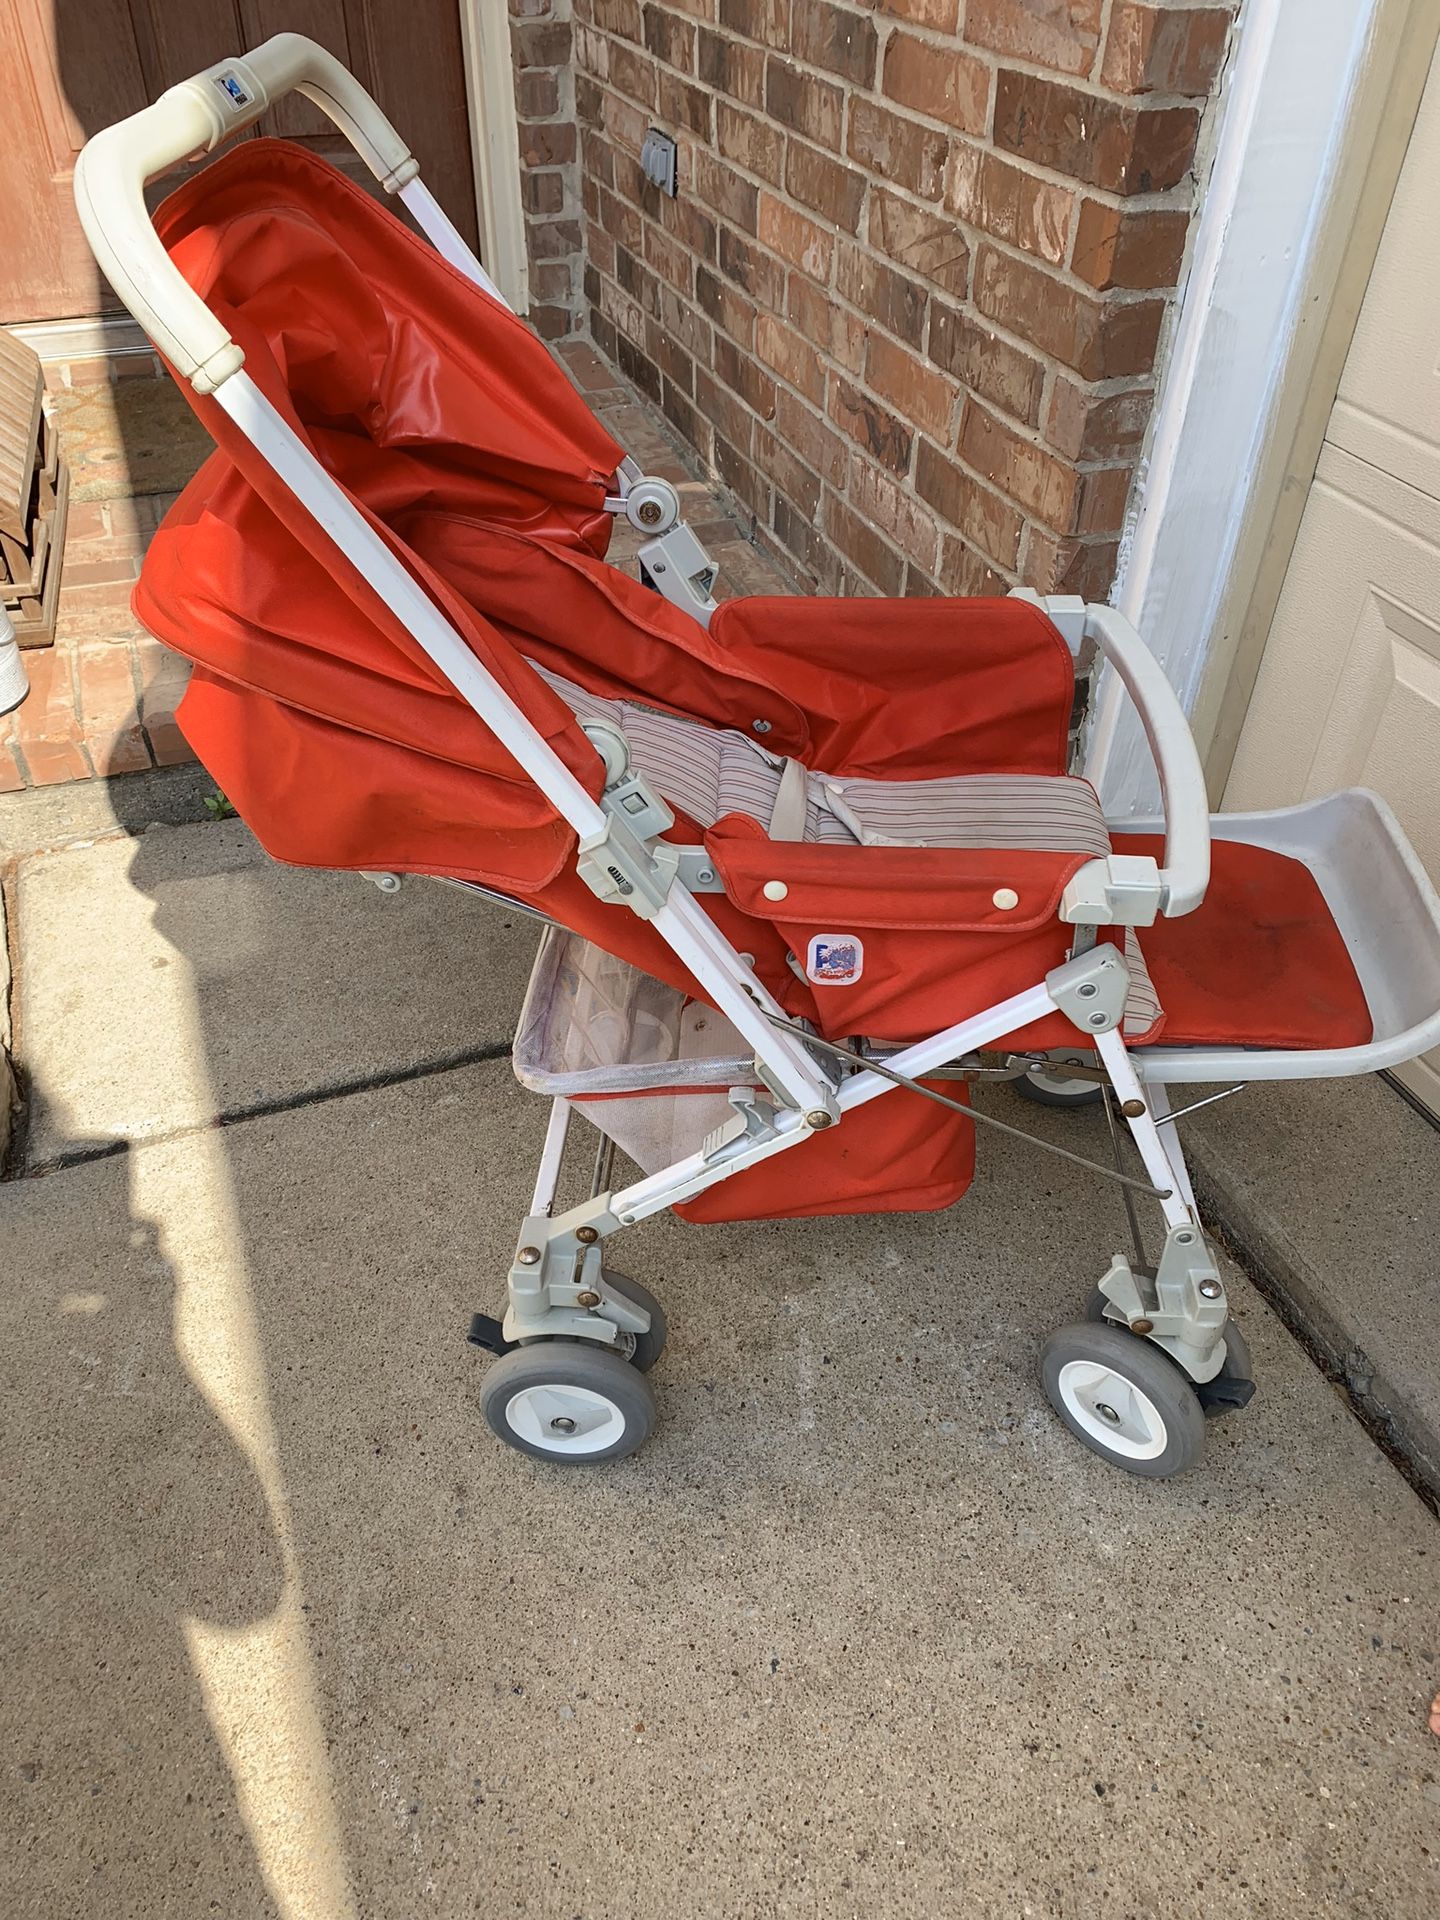 STROLLER, Peg Perego; This stroller is not perfect, VIEW ALL PICTURES, but it works good & what I love most about it is a baby can lay back & take a